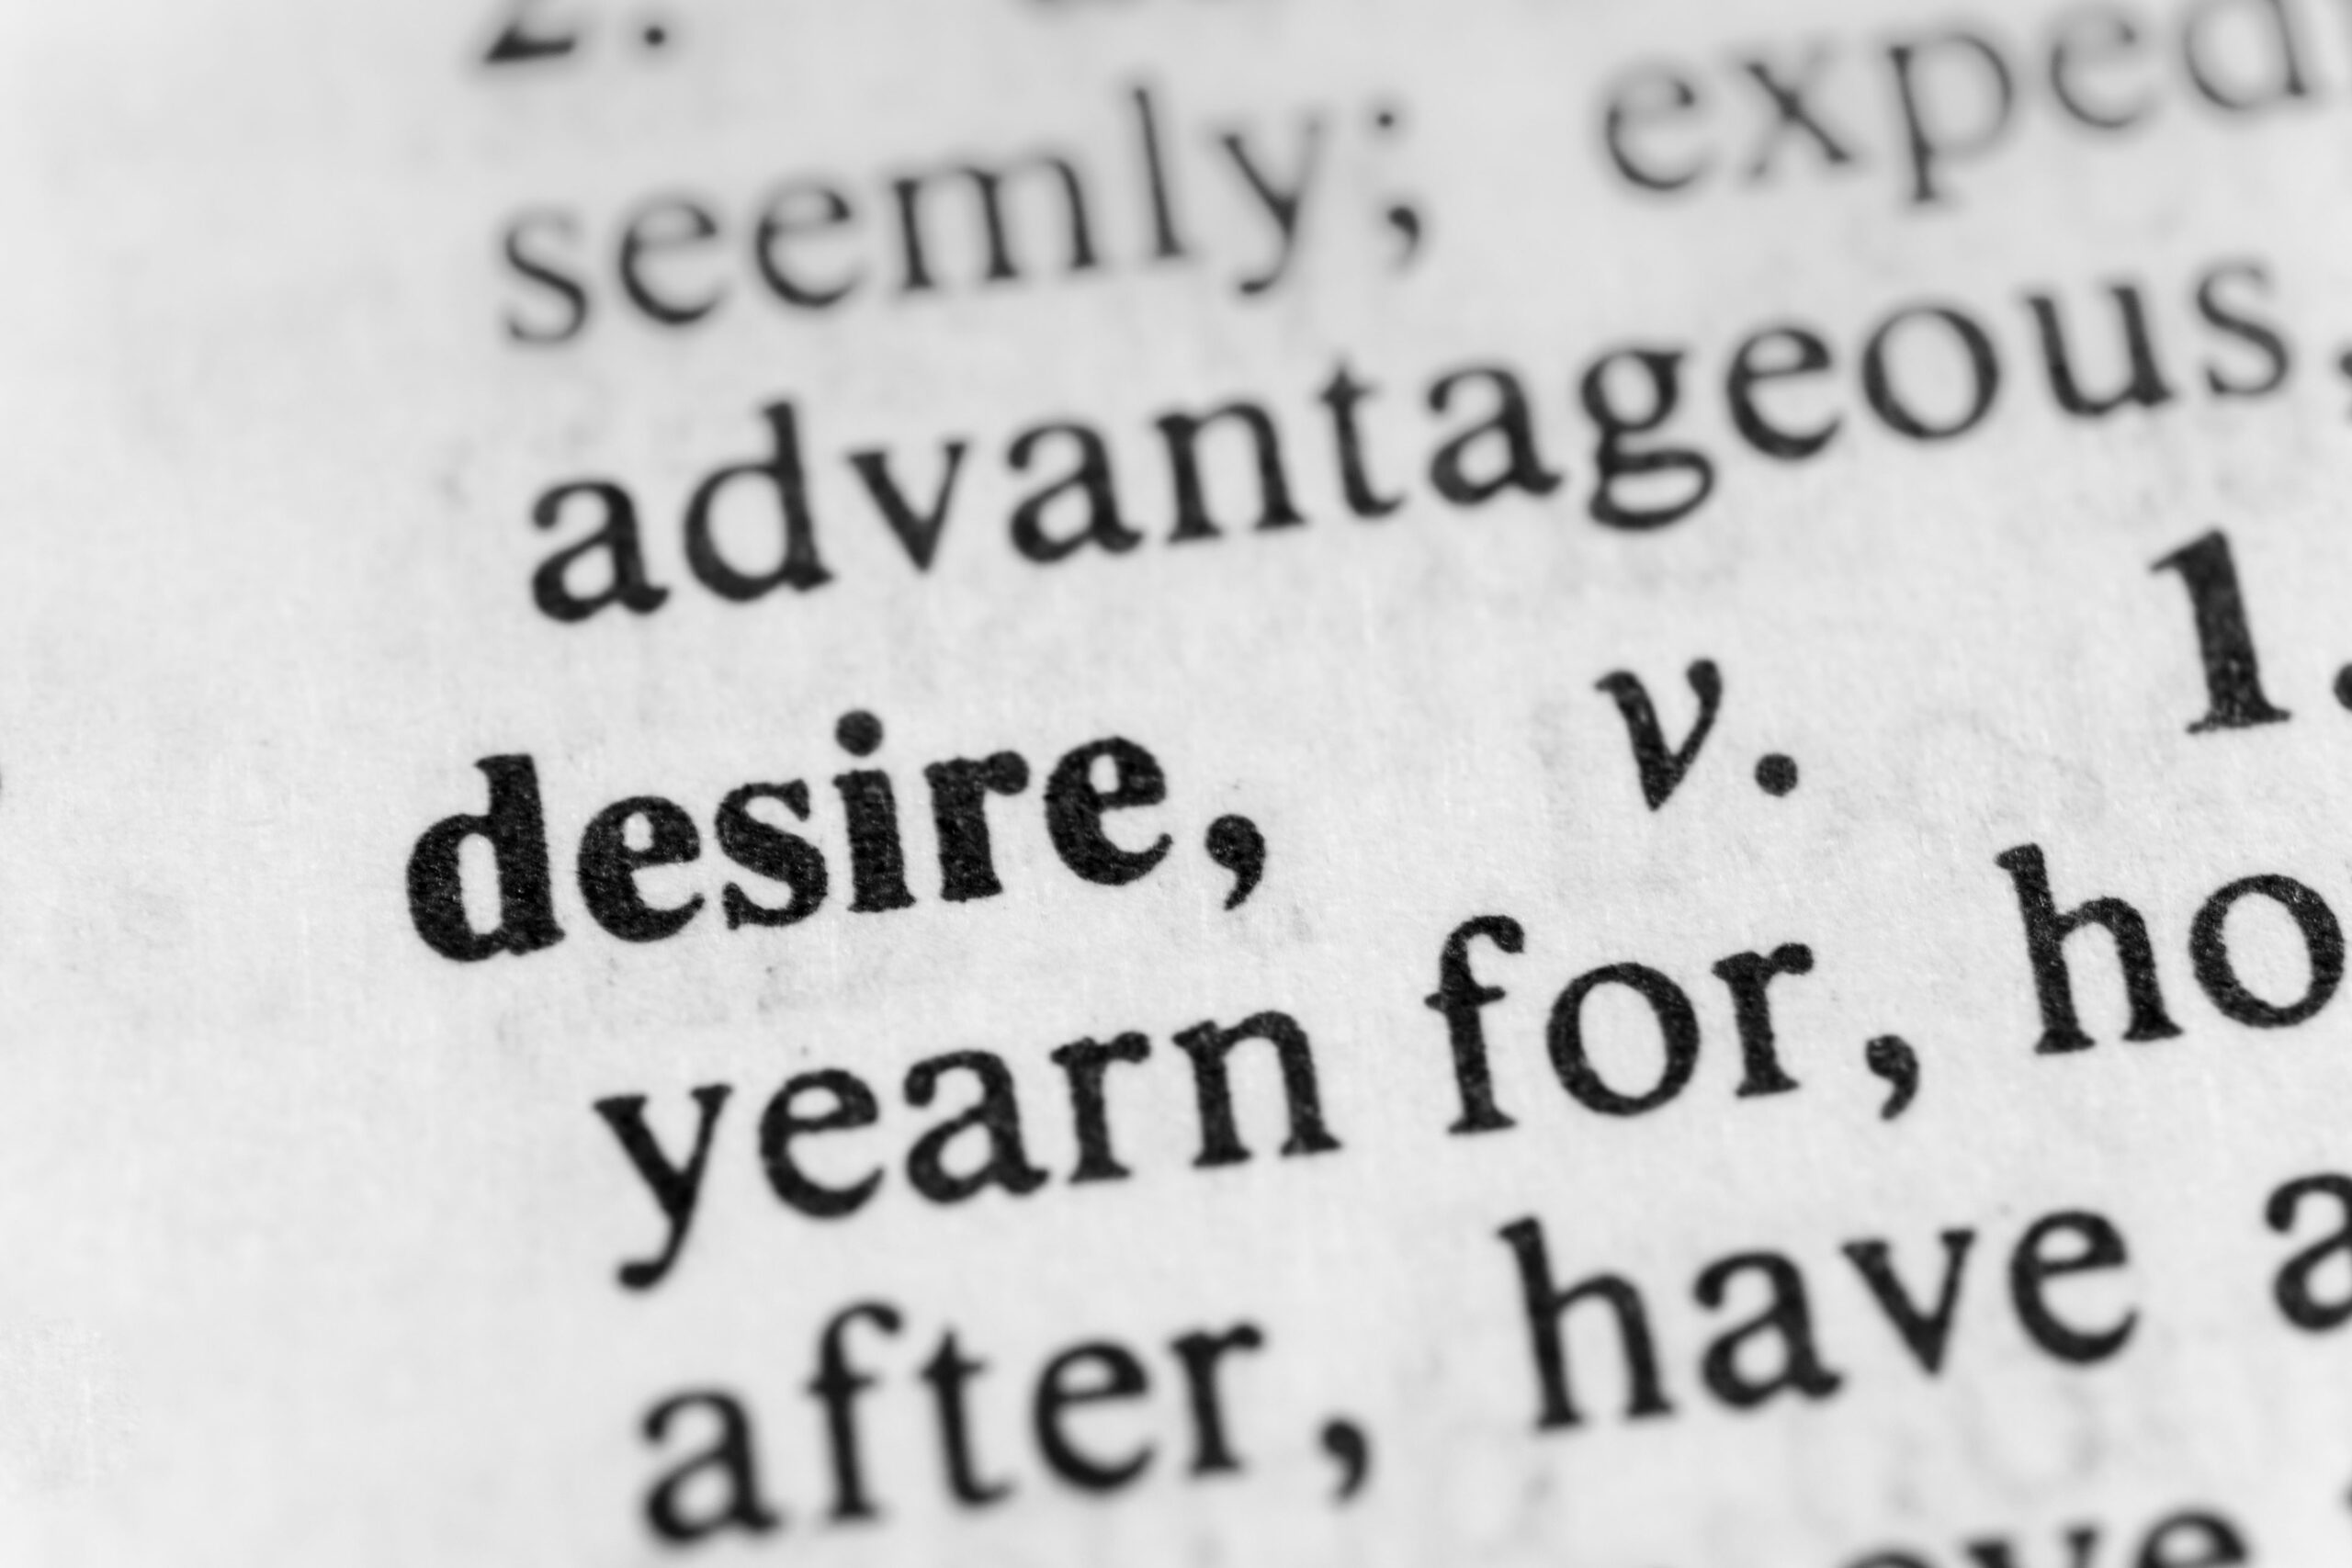 Show your desire